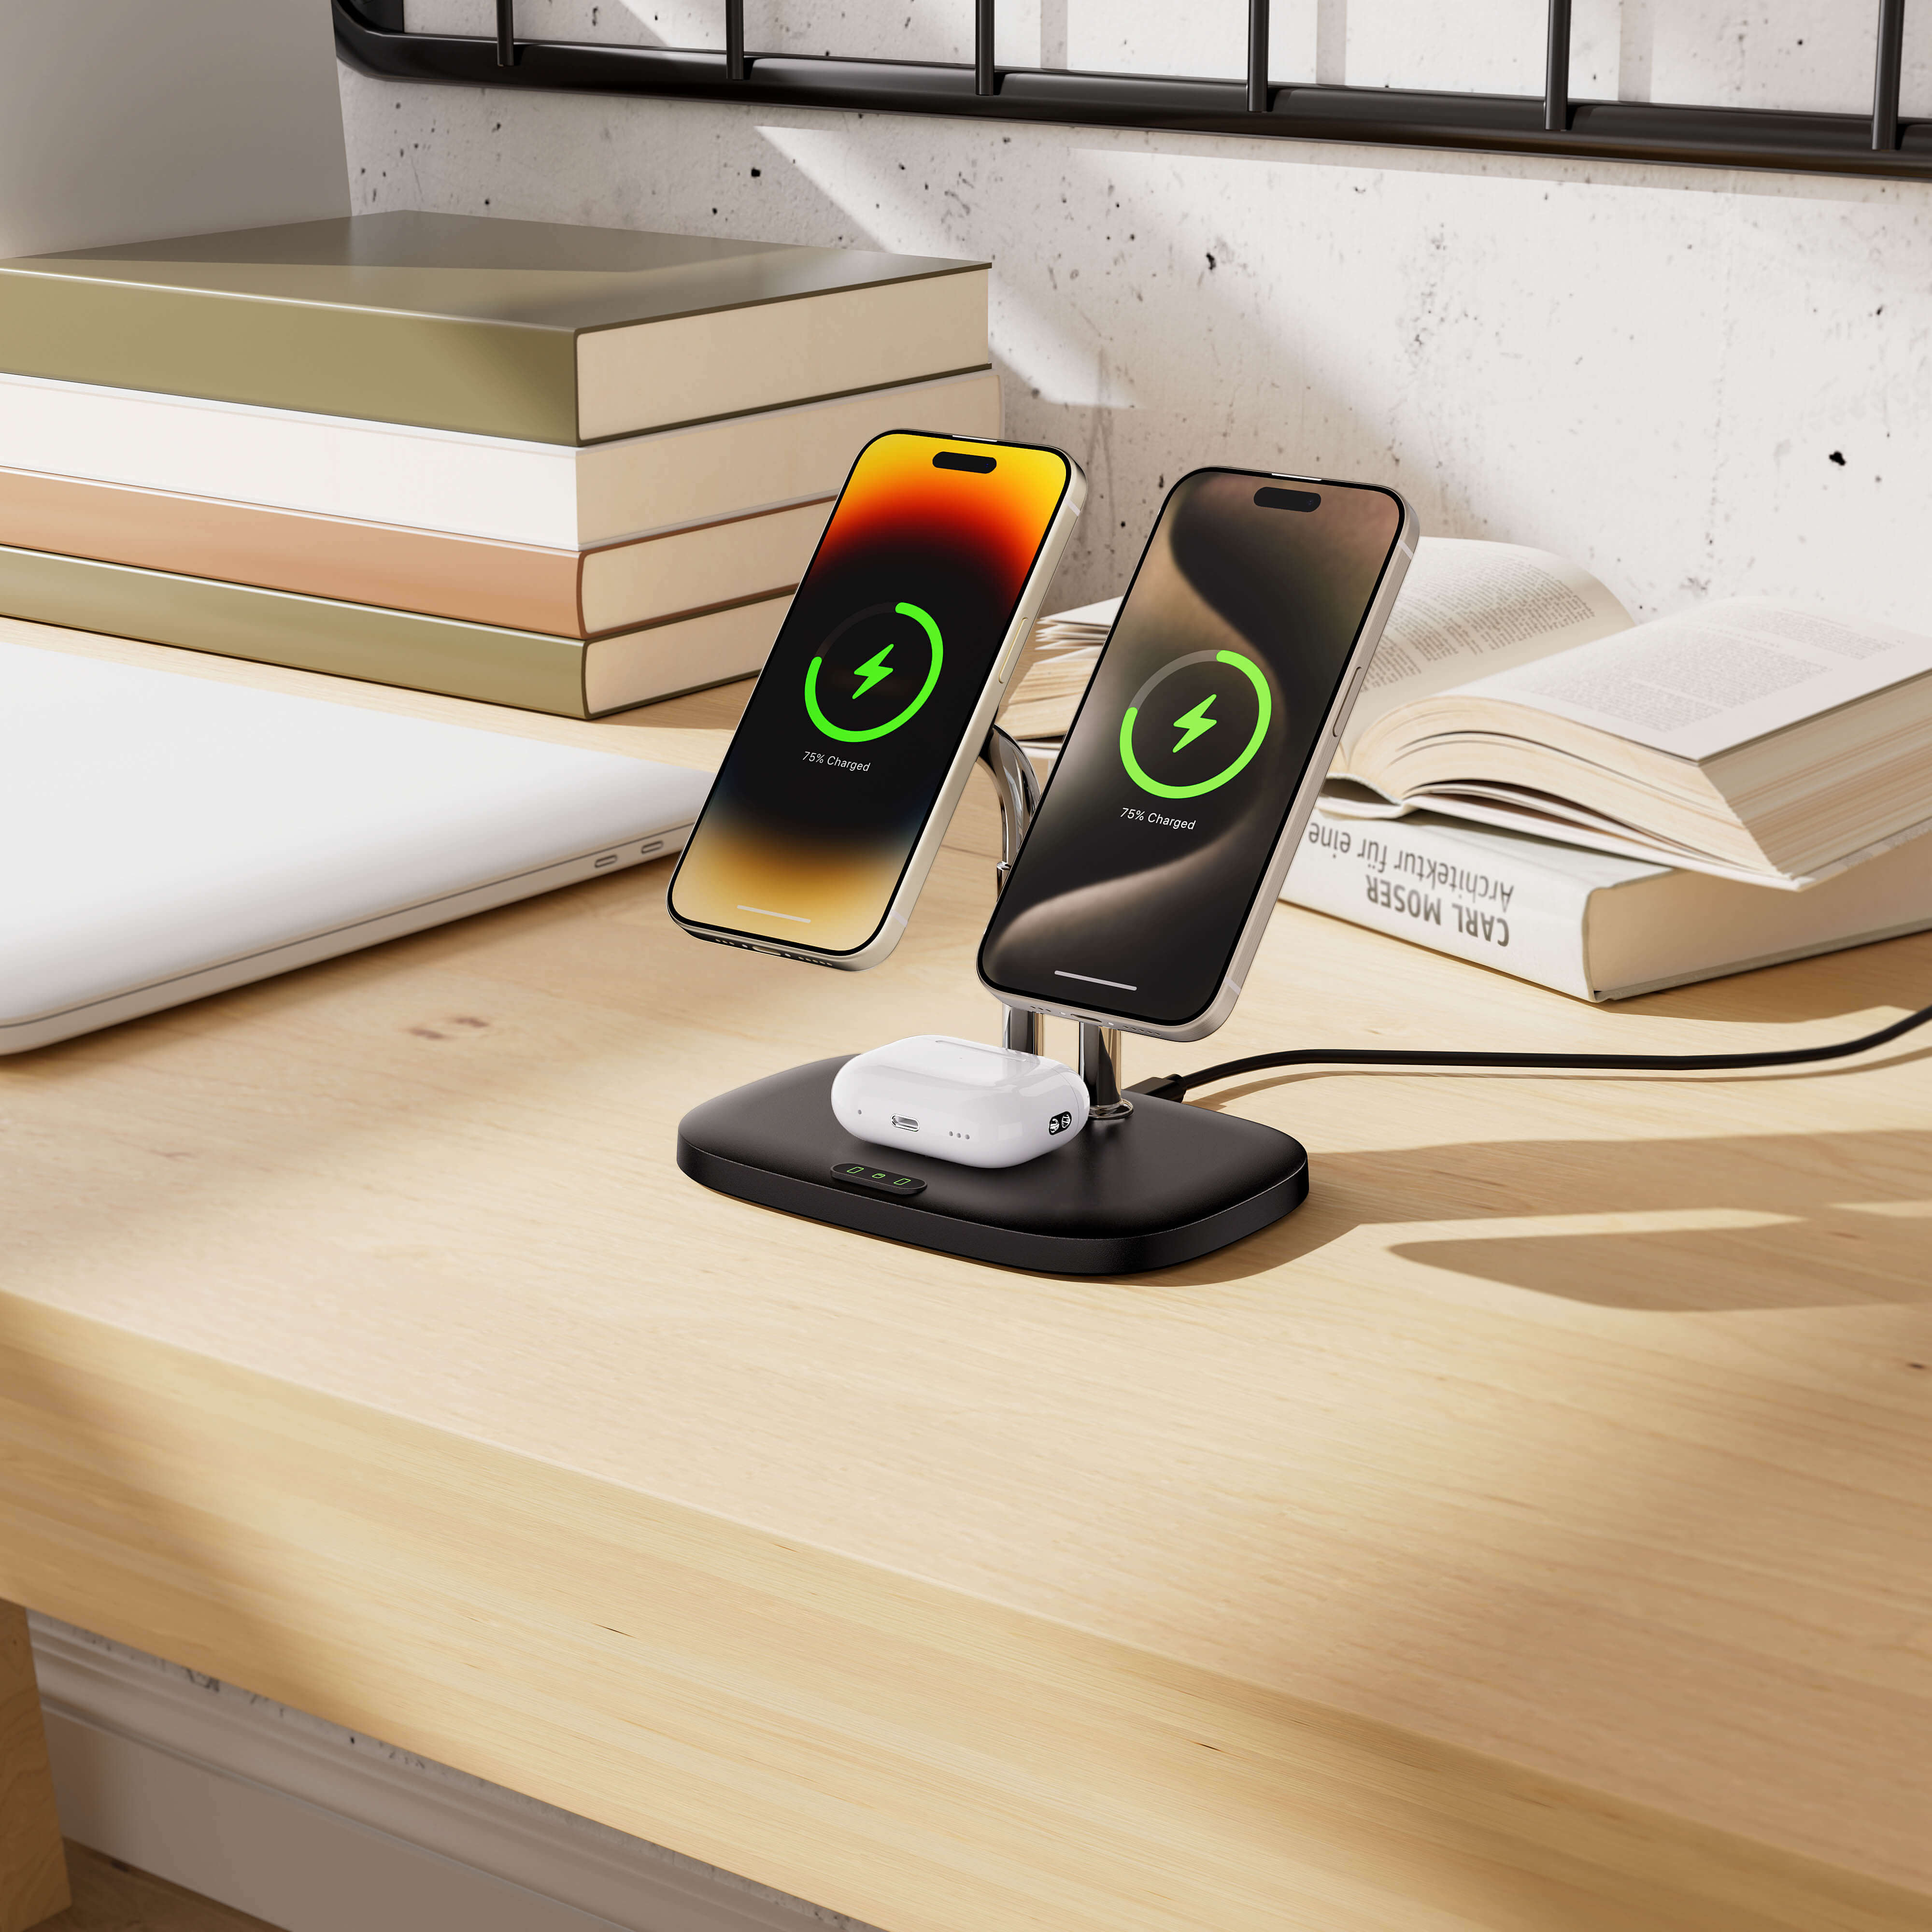 Introducing SwanScout 706M, a 3-in-1 Foldable Wireless Charging Station for Apple devices, designed for compatibility with multiple devices, featuring magnetic suction technology for improved charging efficiency. Its elegant design is sleek and sophisticated, while accurate charging indicators provide intuitive charging status.